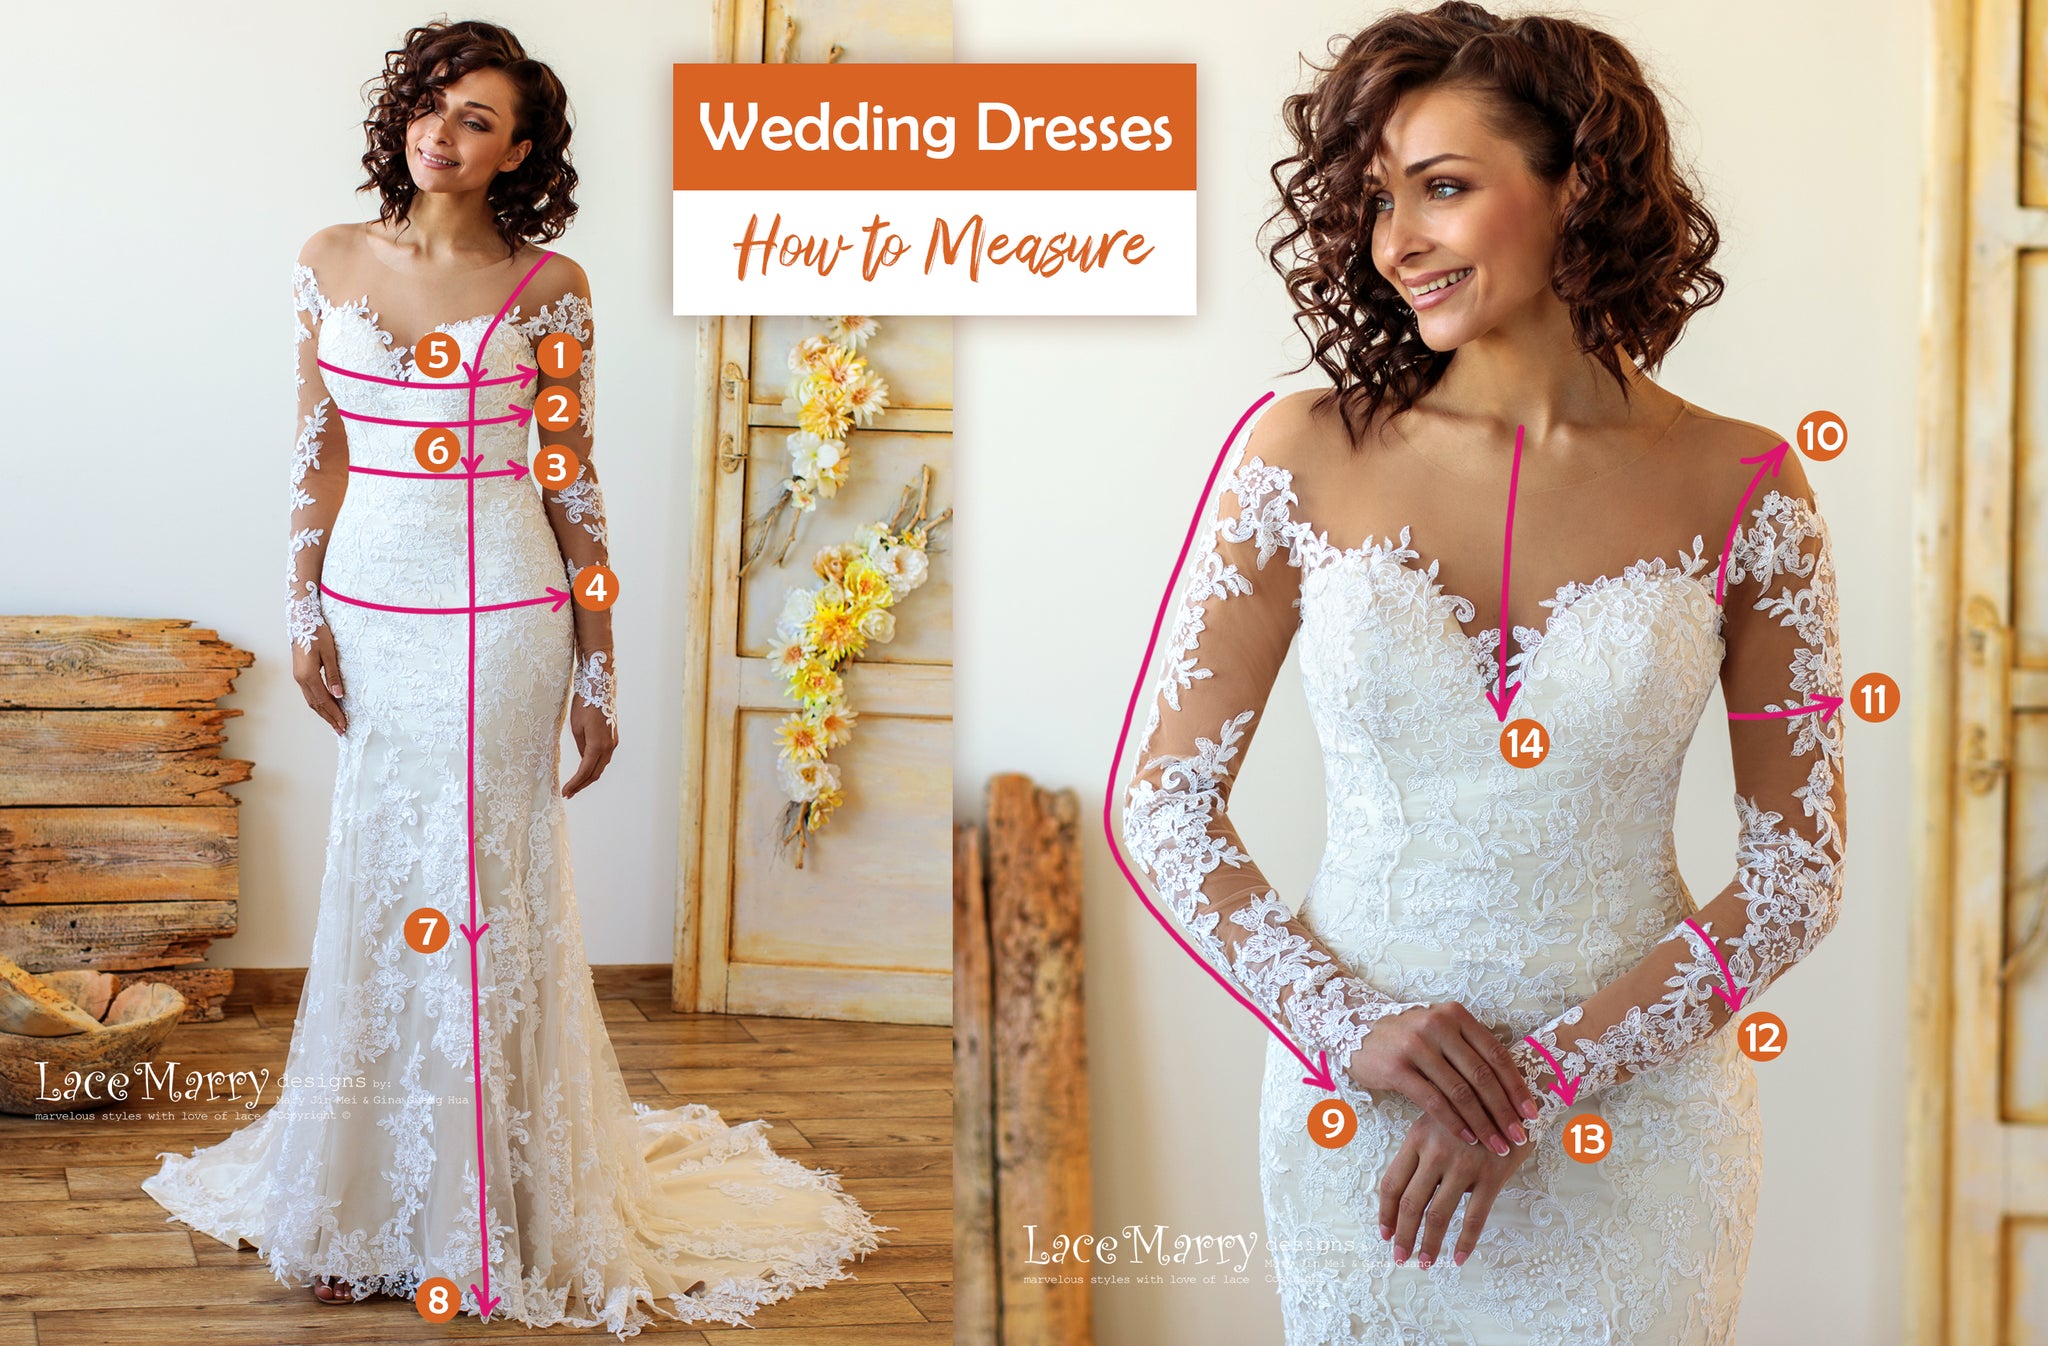 Wedding Dresses How to Measure Instructions